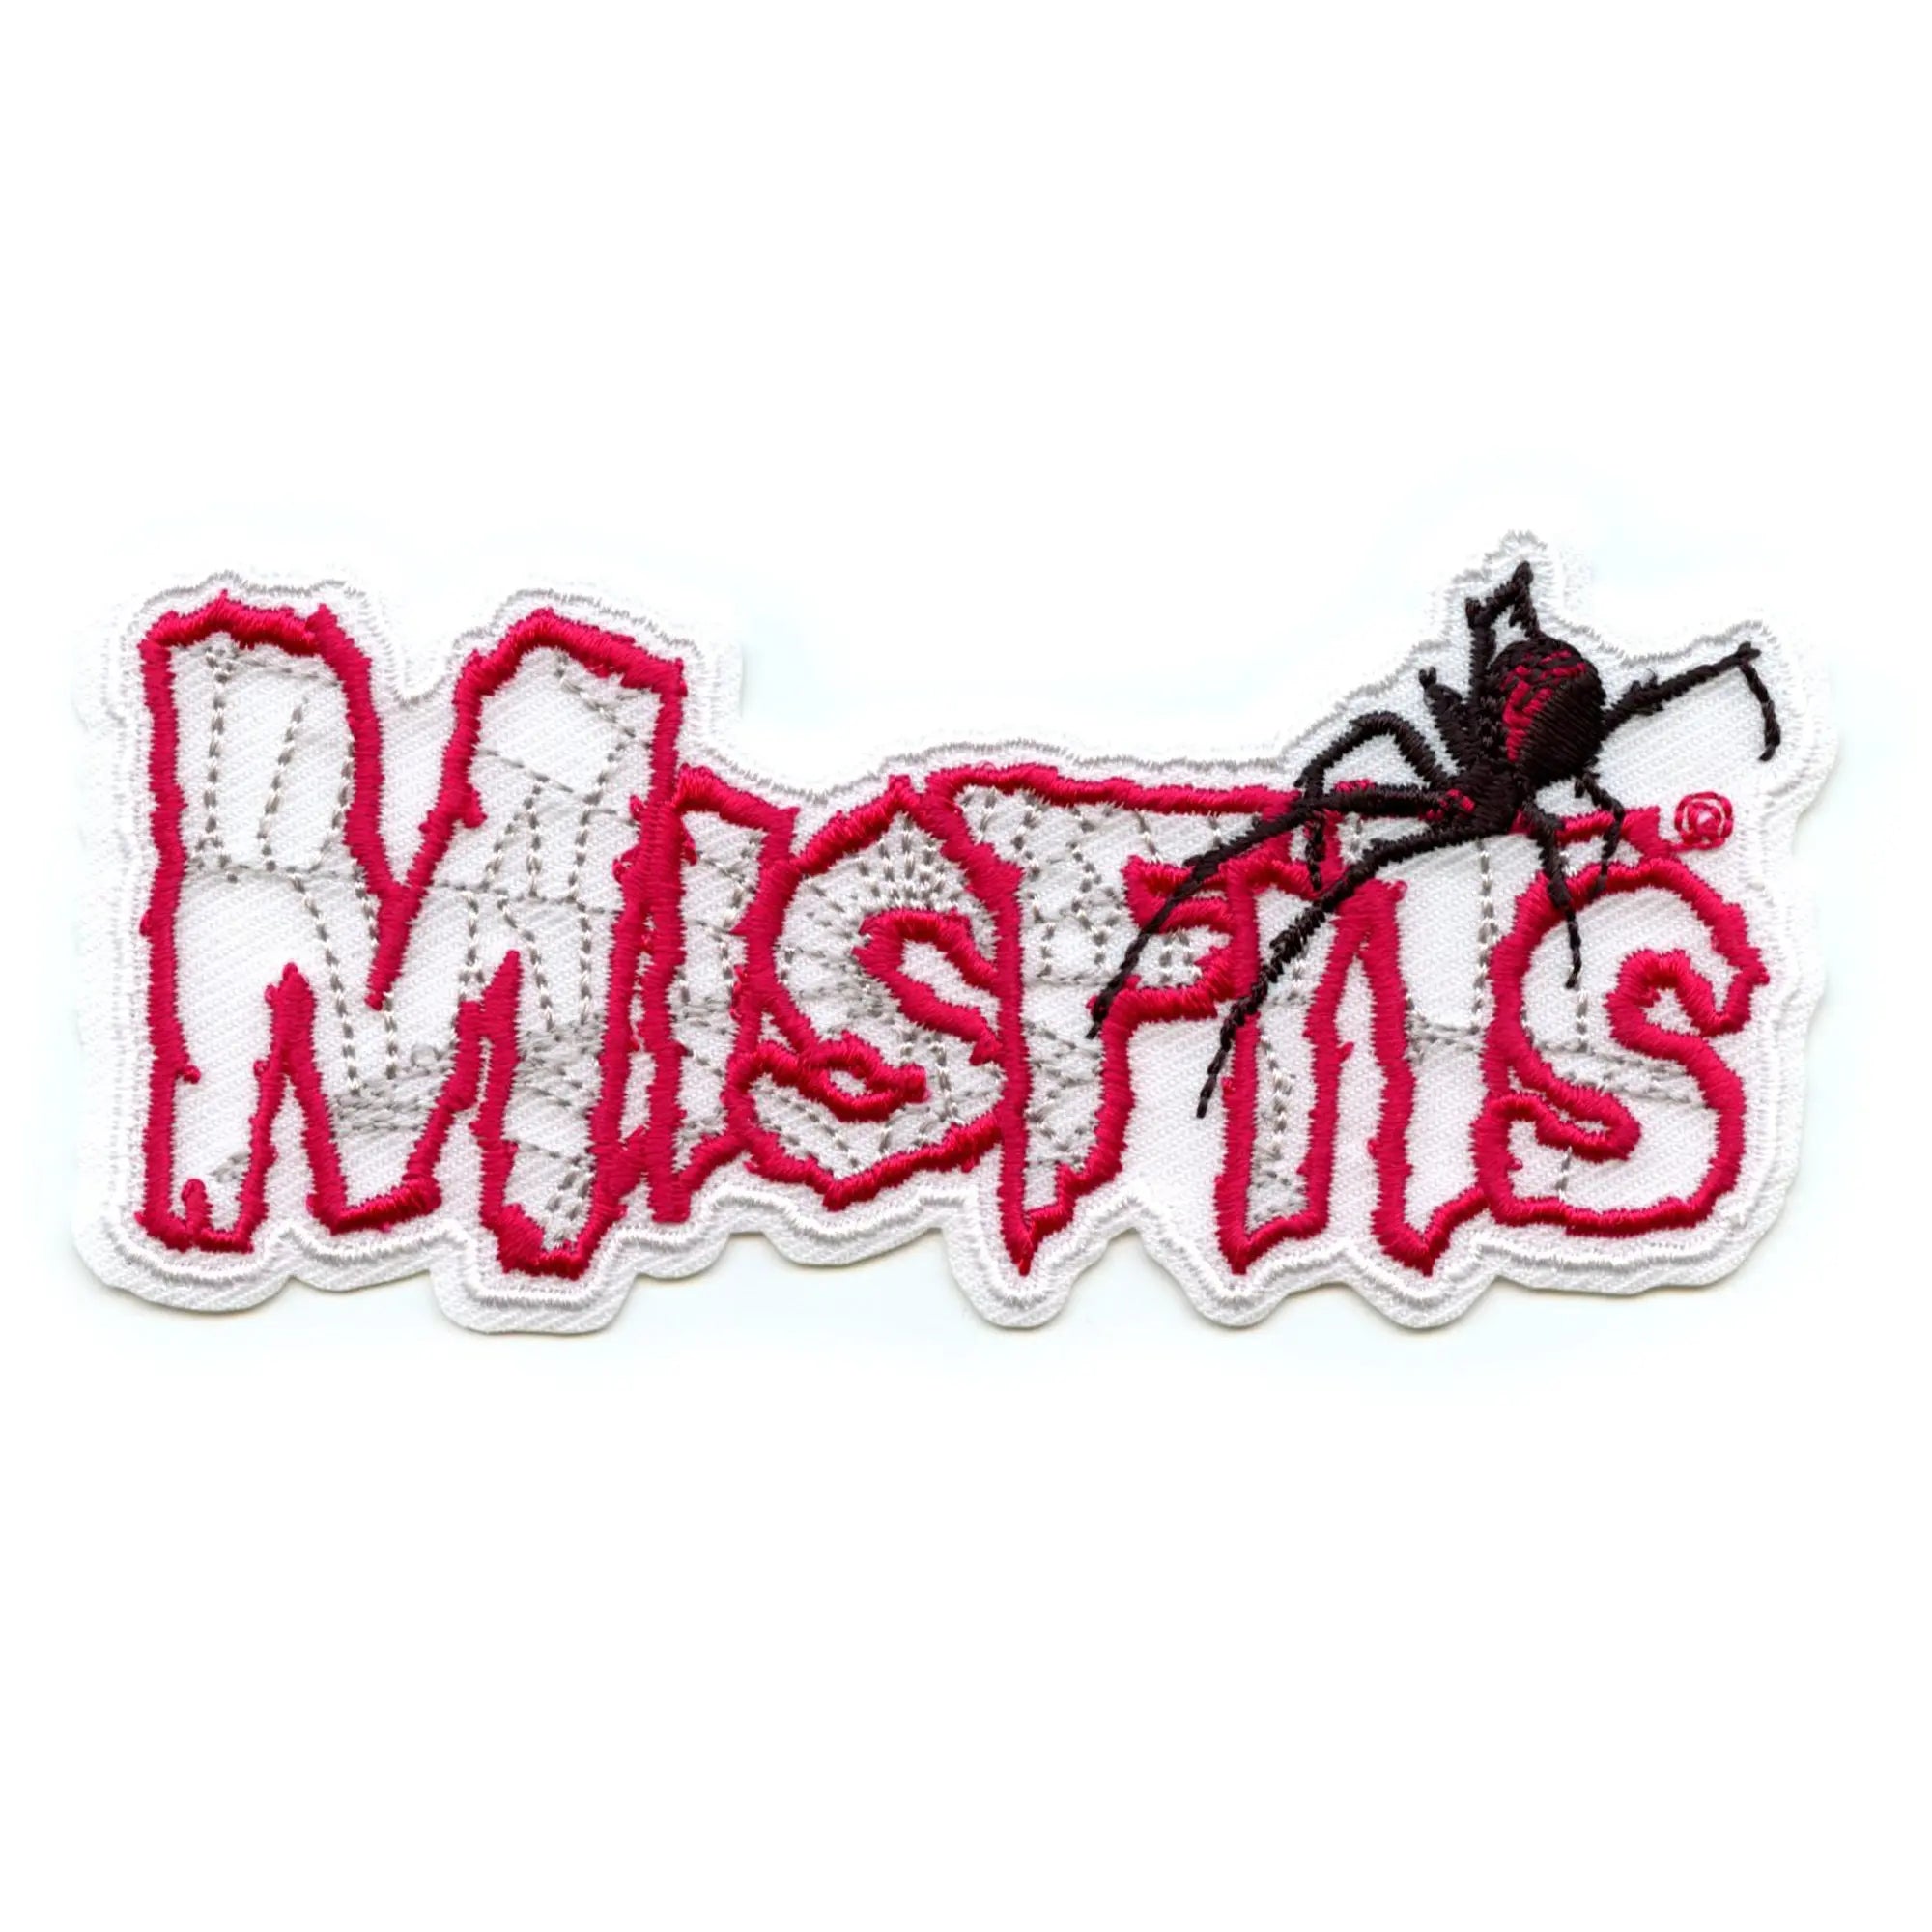 Misfits- 80's Logo ('MISFITS') Glow In The Dark embroidered patch